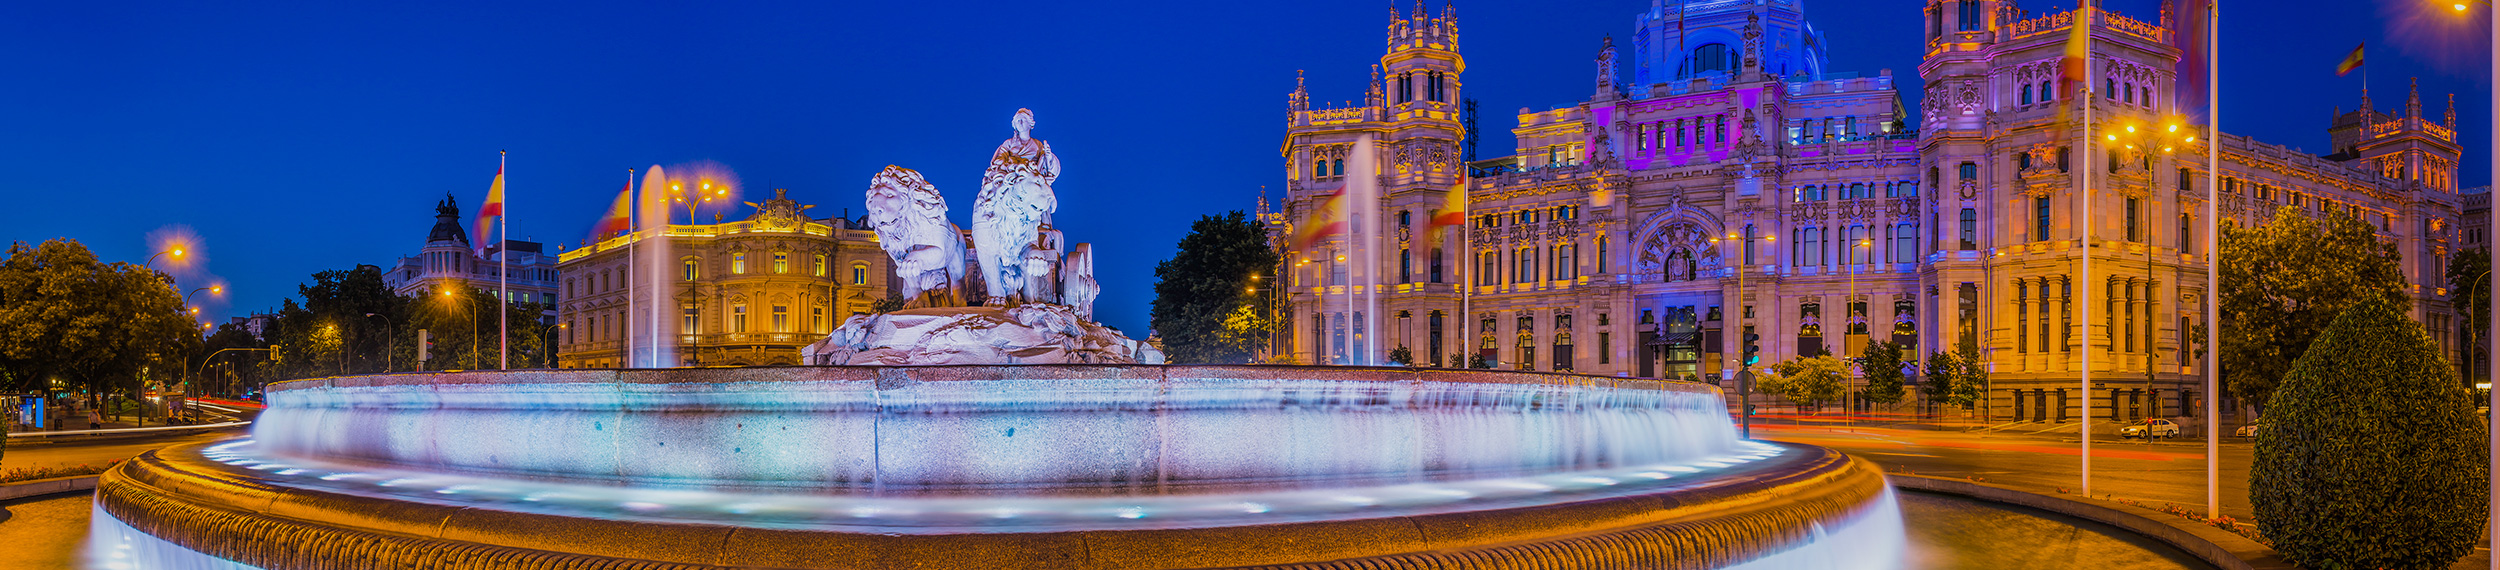 Spotlights illuminating the 18th Century fountain of Cybele overlooked by the iconic towers of the Palacio de Cibeles colourfully lit against the deep blue dusk skies above the Plaza de Cibele.